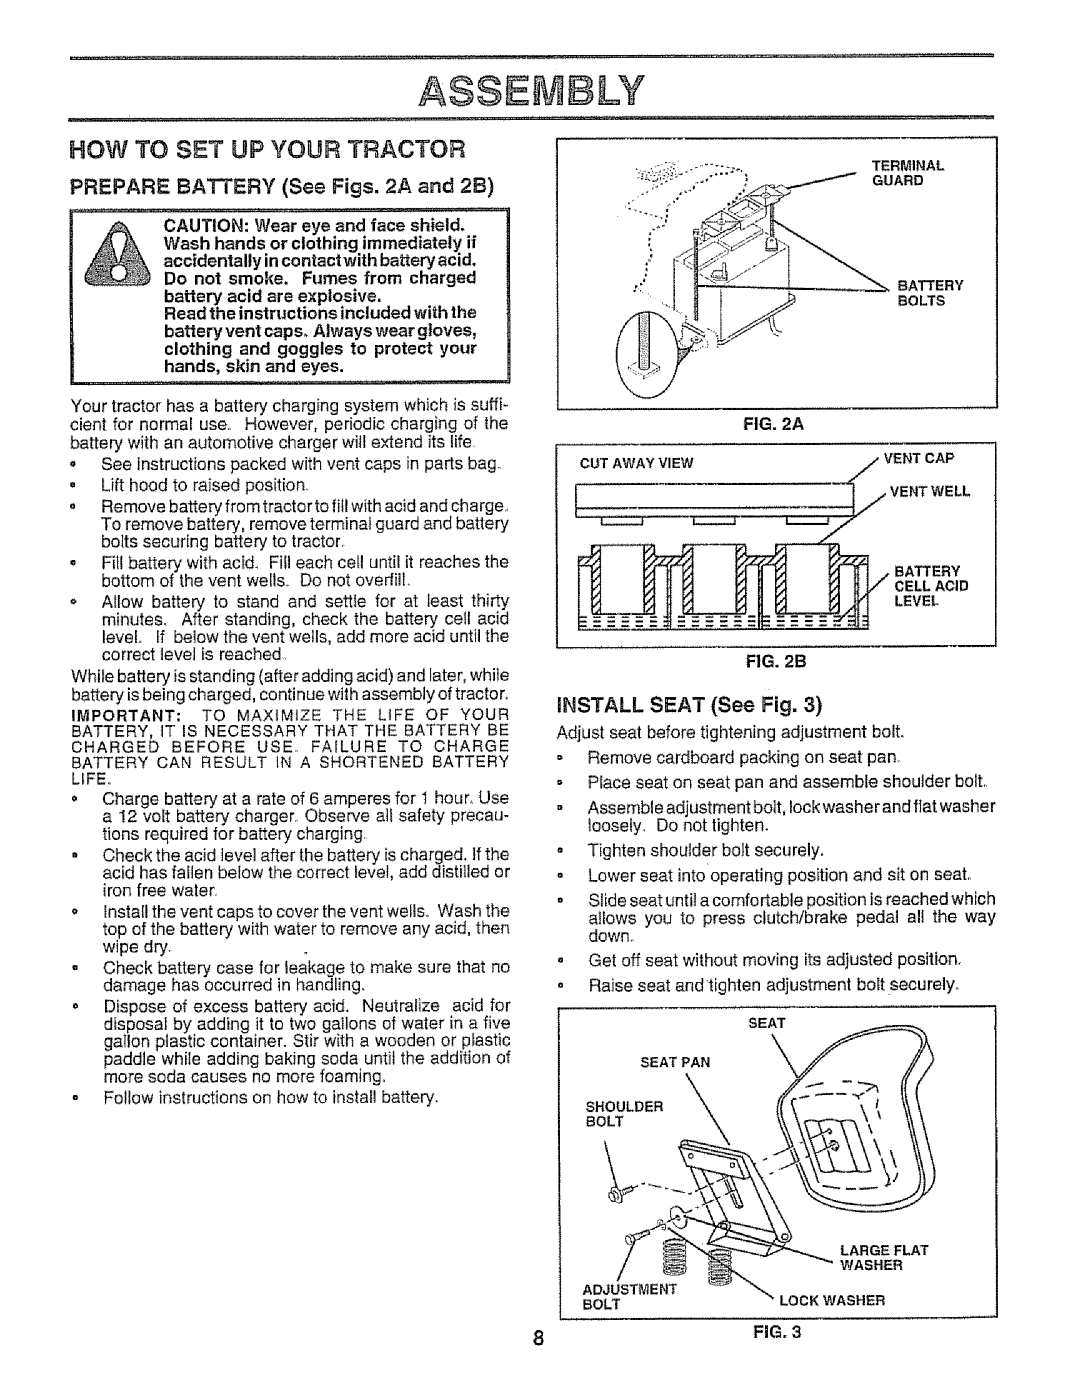 Craftsman 917.252560 manual Assembly, How To Set Up Your Tractor, PREPARE BATTERY See Figs, 2A and 2B 